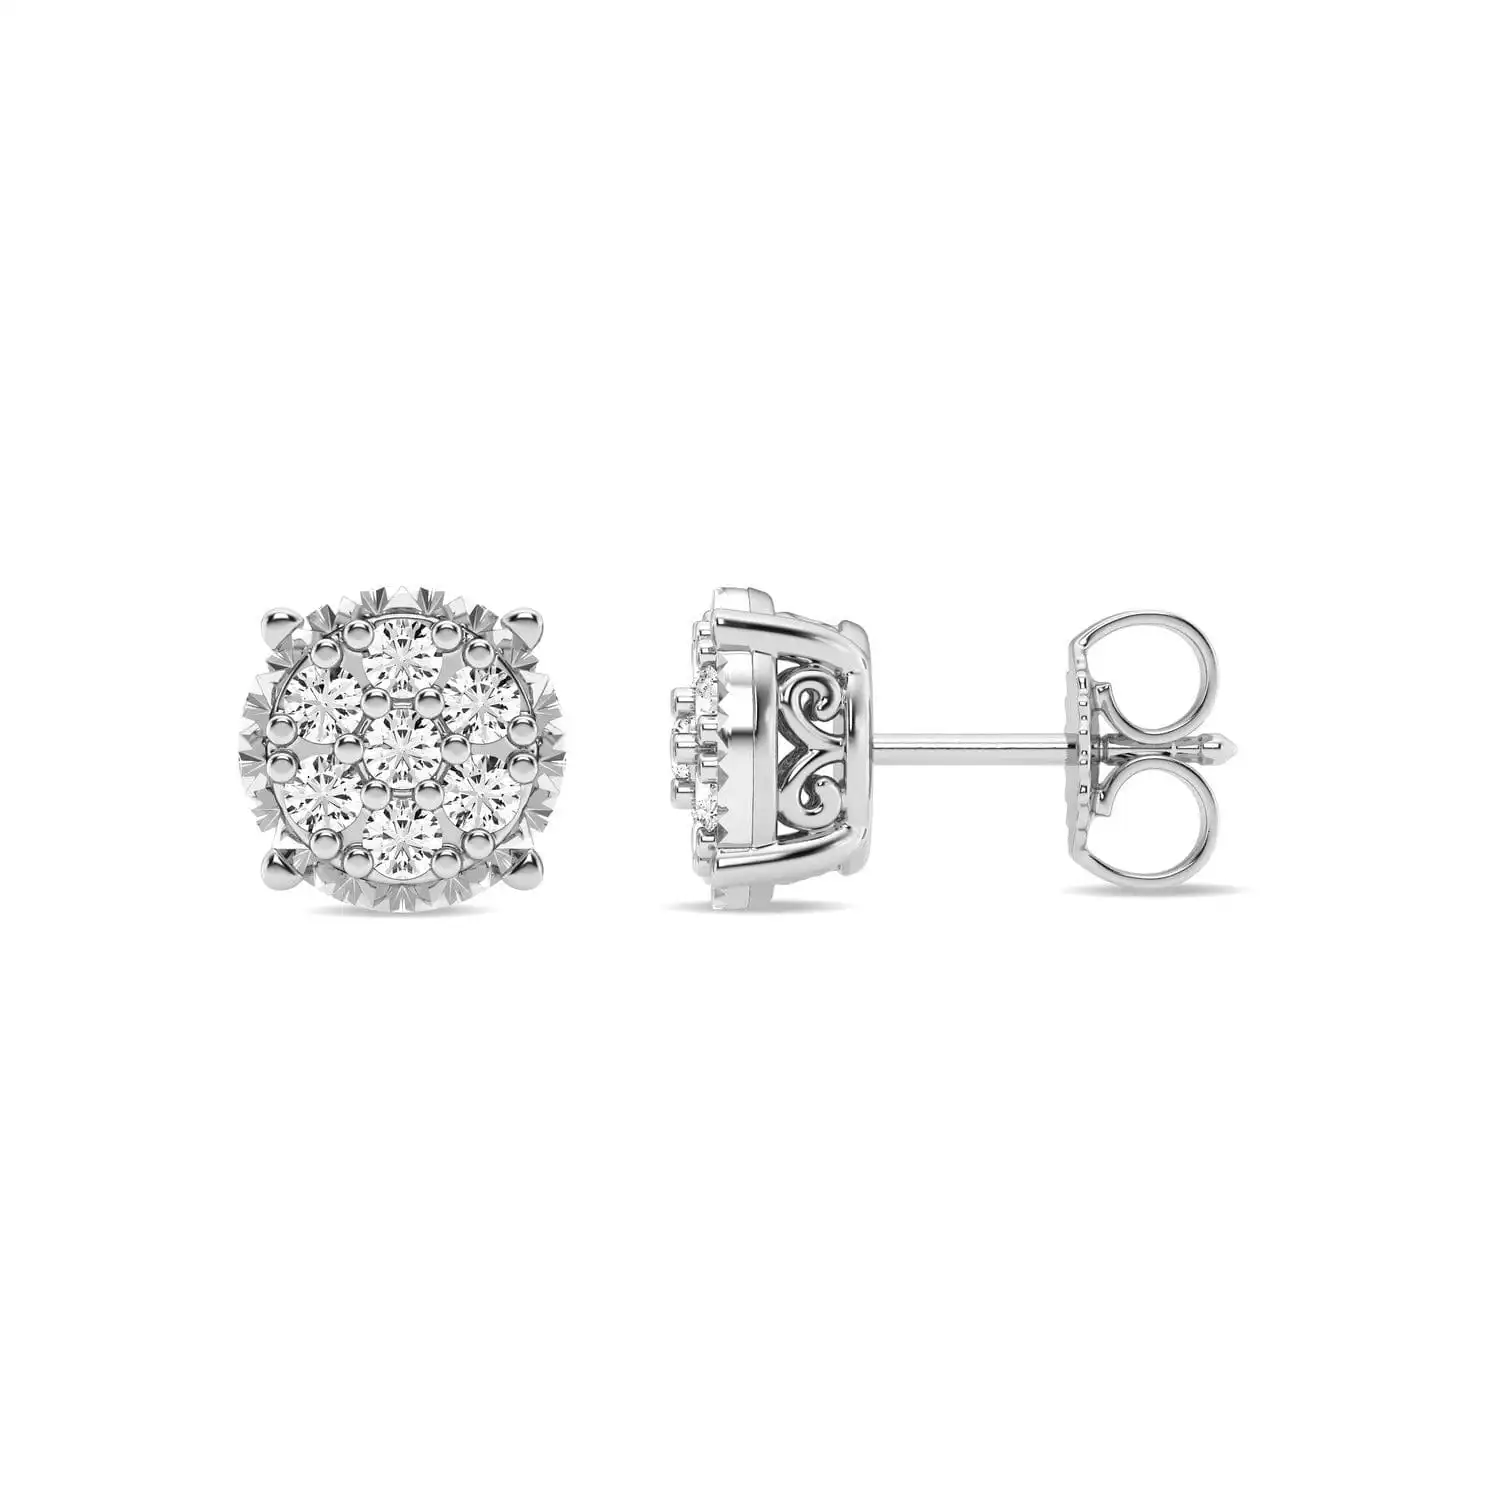 Meera Flower Composite Earrings with 1/3ct of Laboratory Grown Diamonds in 9ct White Gold